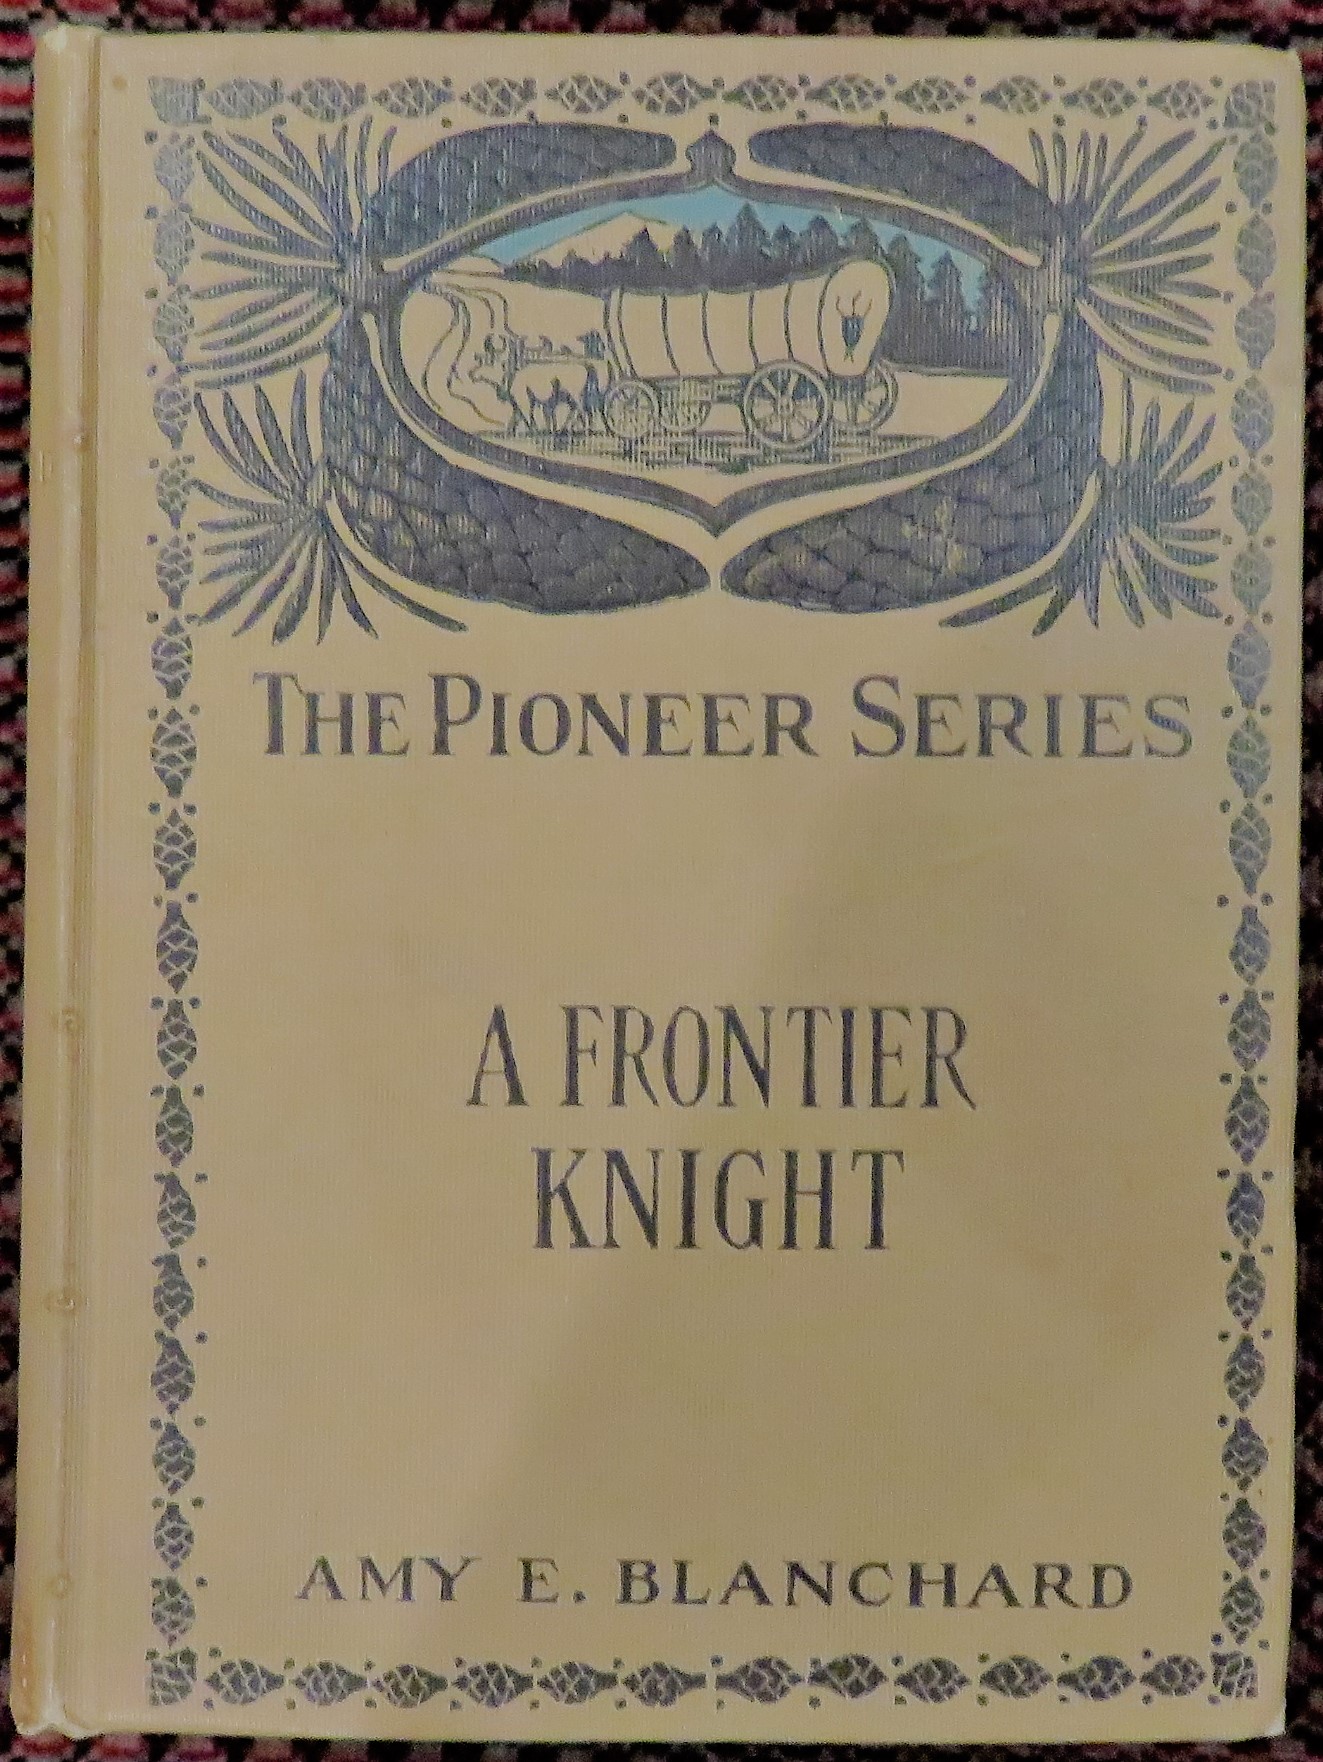 The Pioneer Series: A Frontier Knight